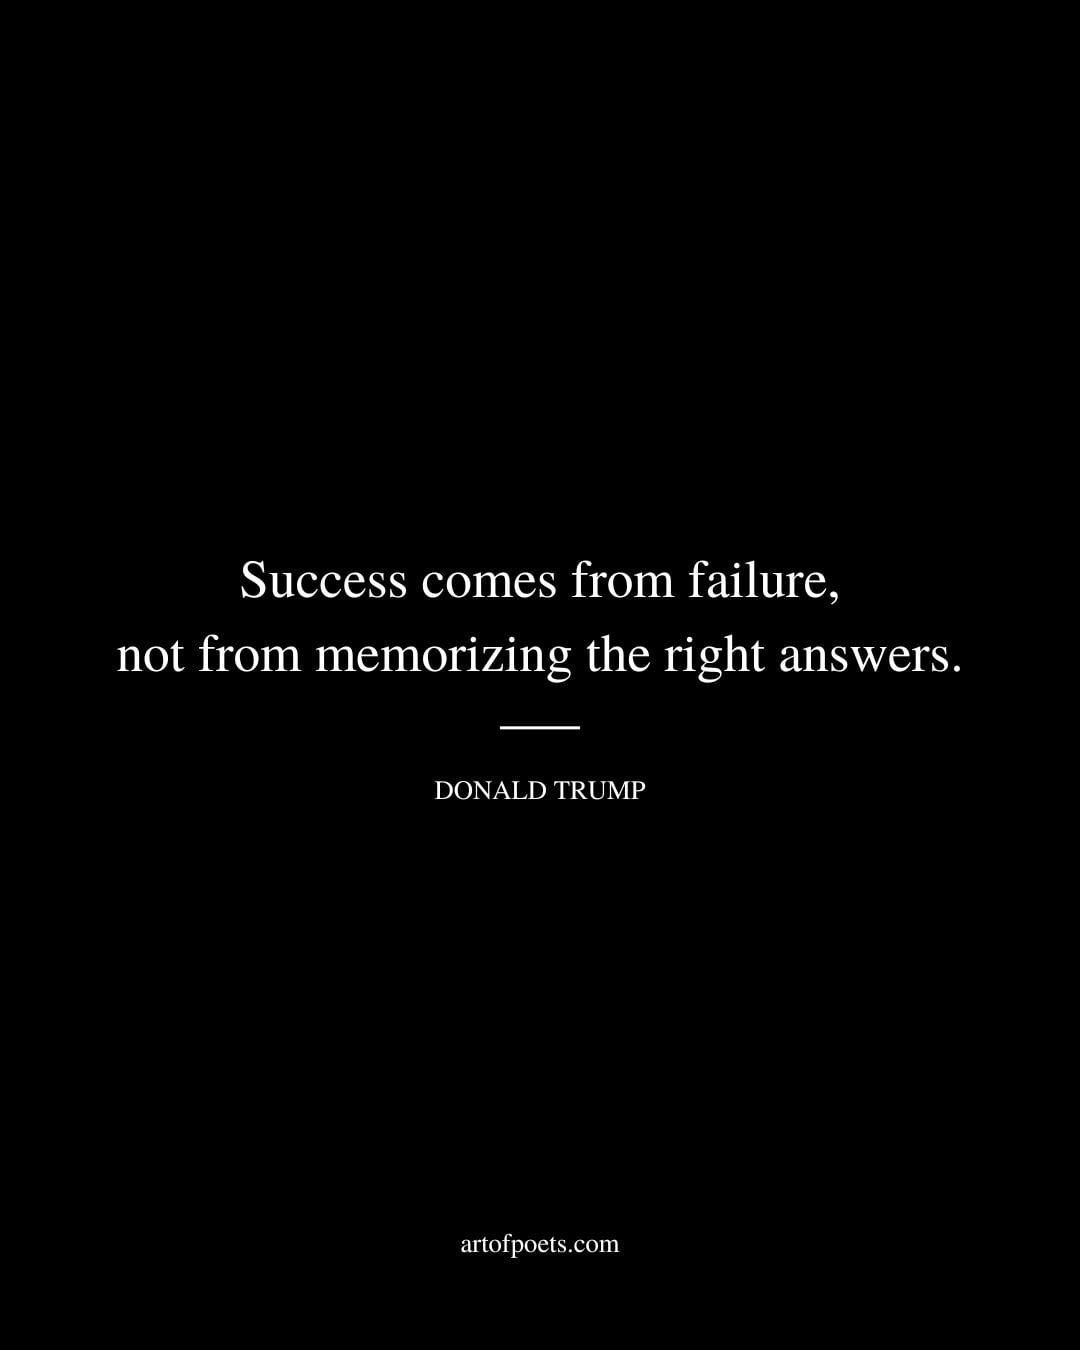 Success comes from failure not from memorizing the right answers